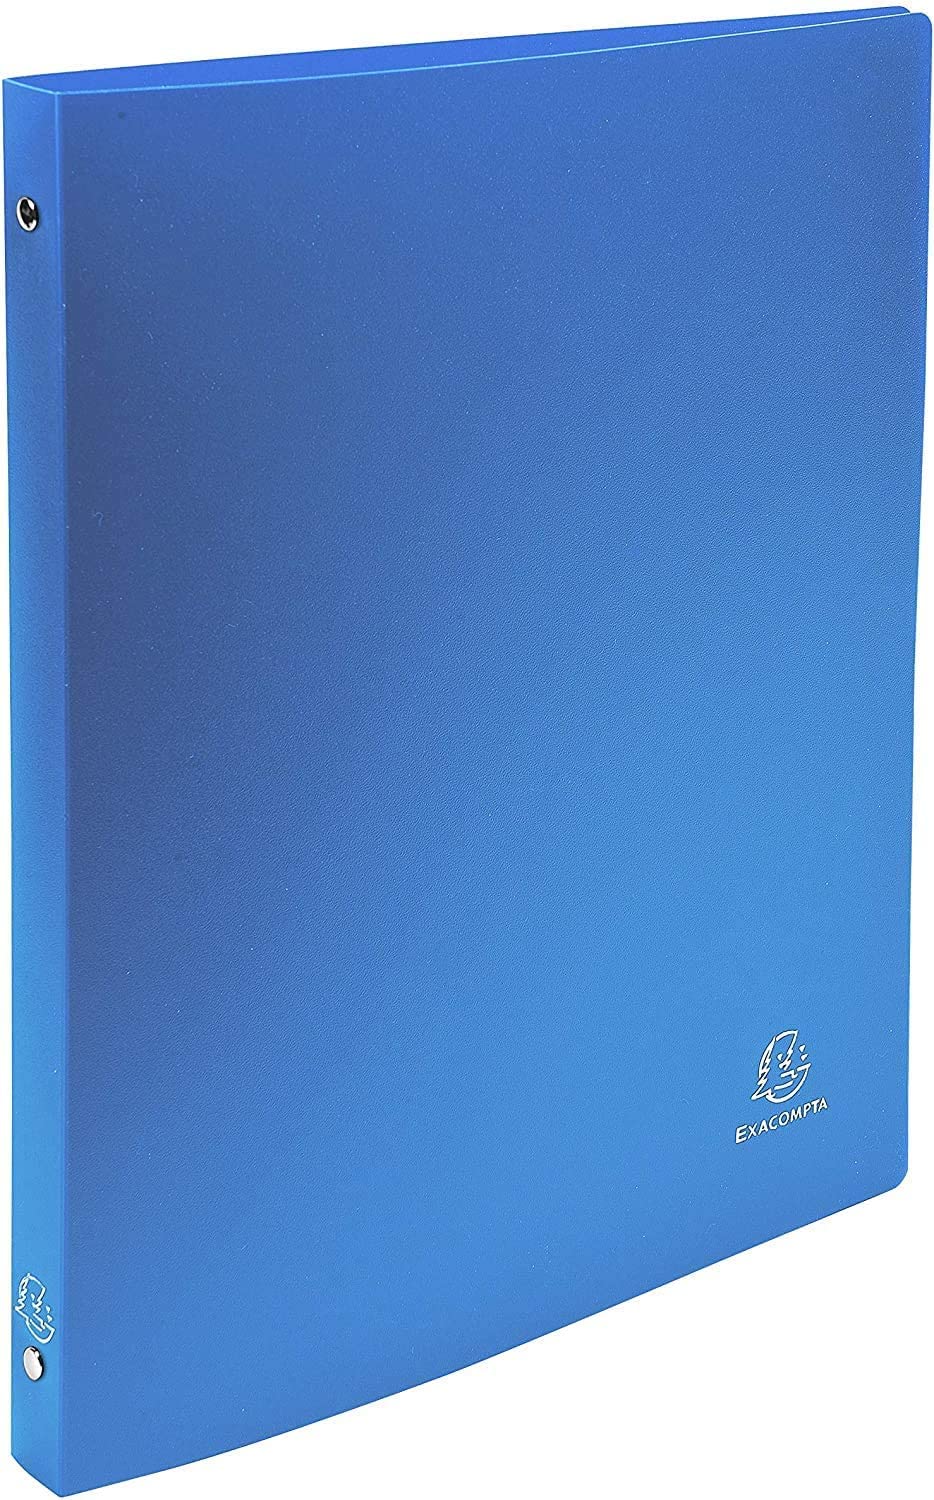 Exacompta A4 Ring Binder 2 Ring Light Blue RRP 2.34 CLEARANCE XL 99p